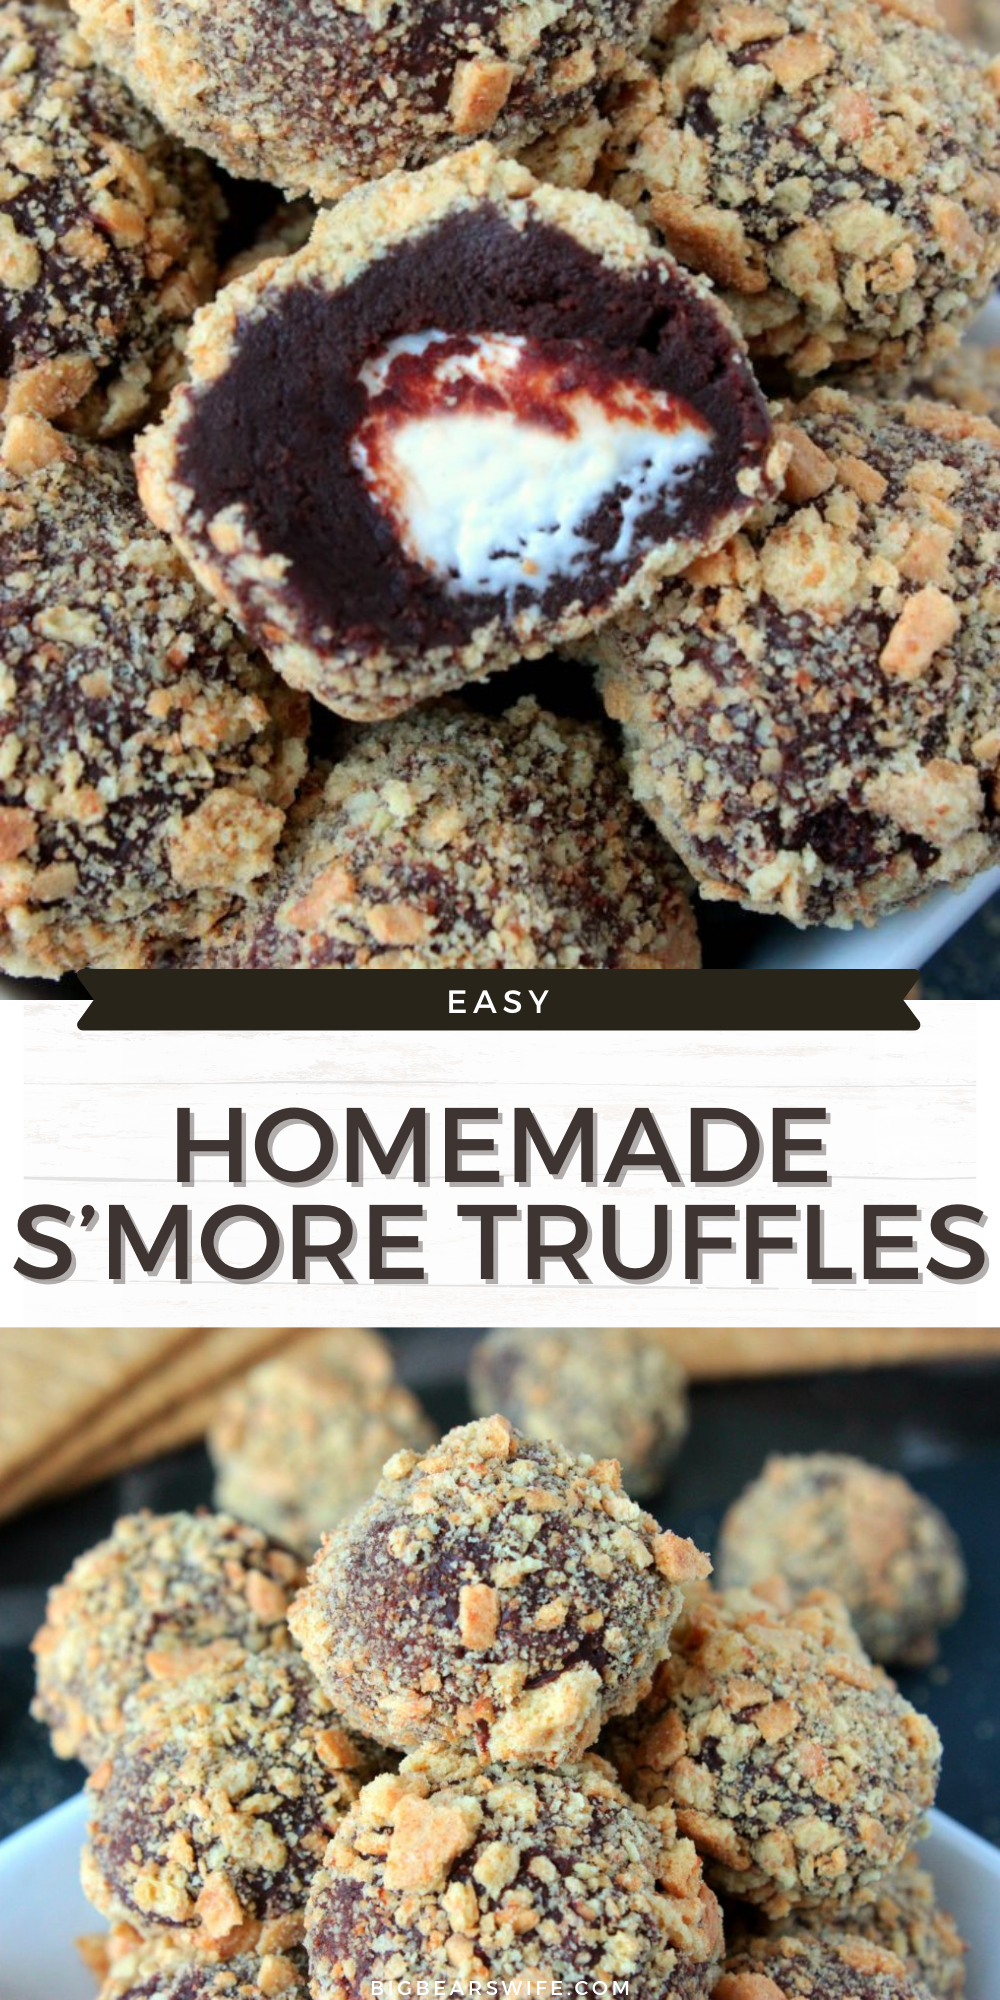 Homemade S'more Truffles - Know a s'more lover in your life? You NEED to send this recipe for Homemade S'more Truffles to them asap! Homemade Chocolate ganache truffles with a marshmallow center that's been rolled in crushed graham crackers is a s'mores lover's dream come true. via @bigbearswife